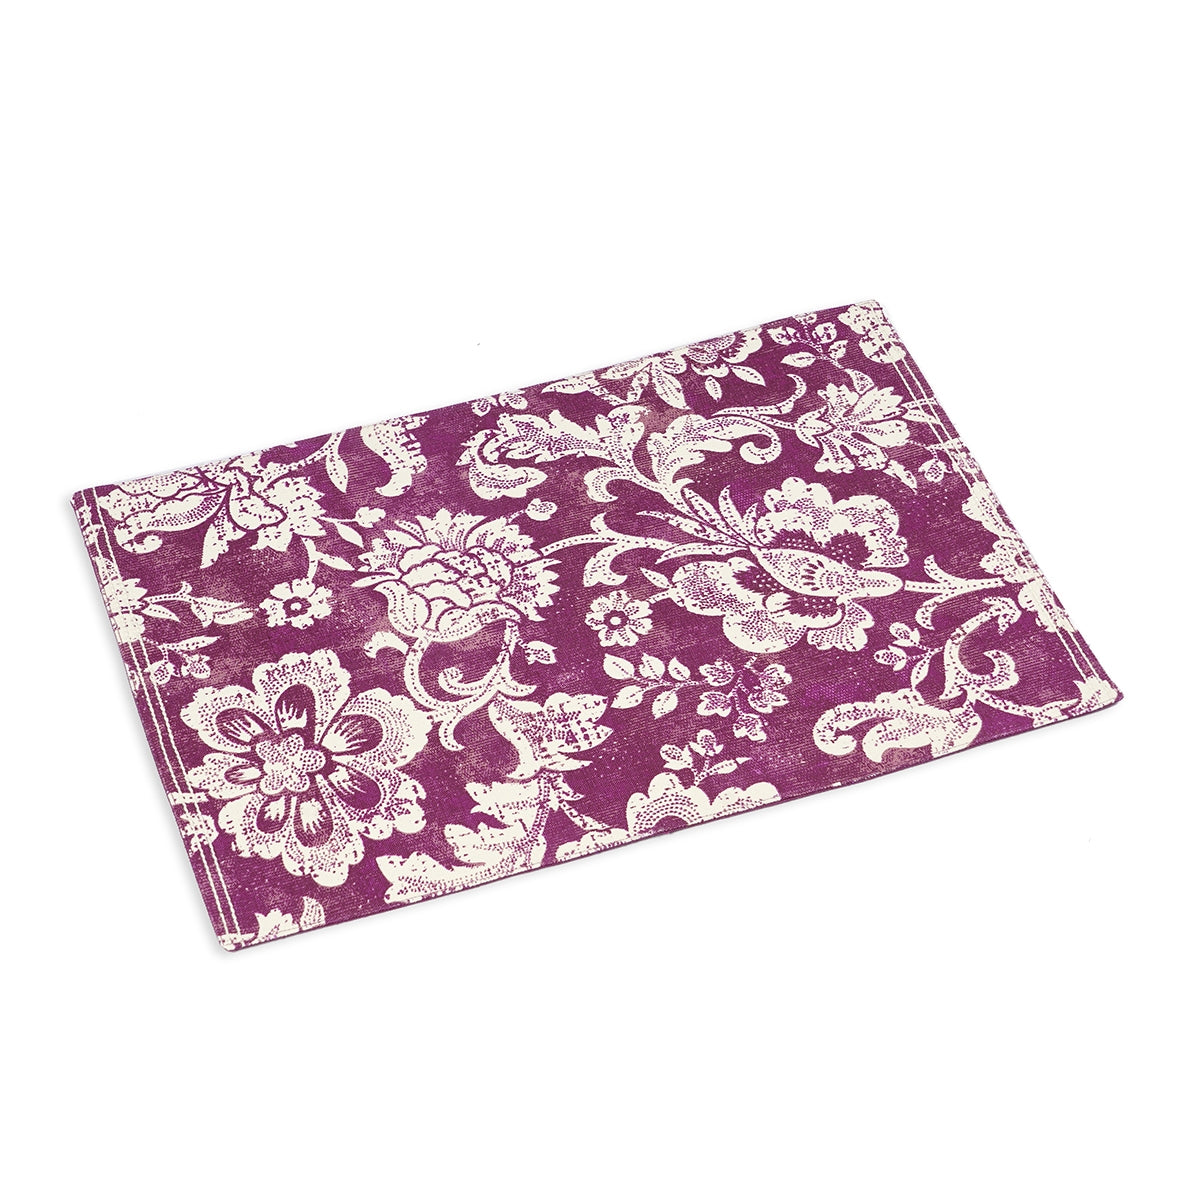 Maroon/Plum cotton Placemat with bold floral block print , 13X19 inches